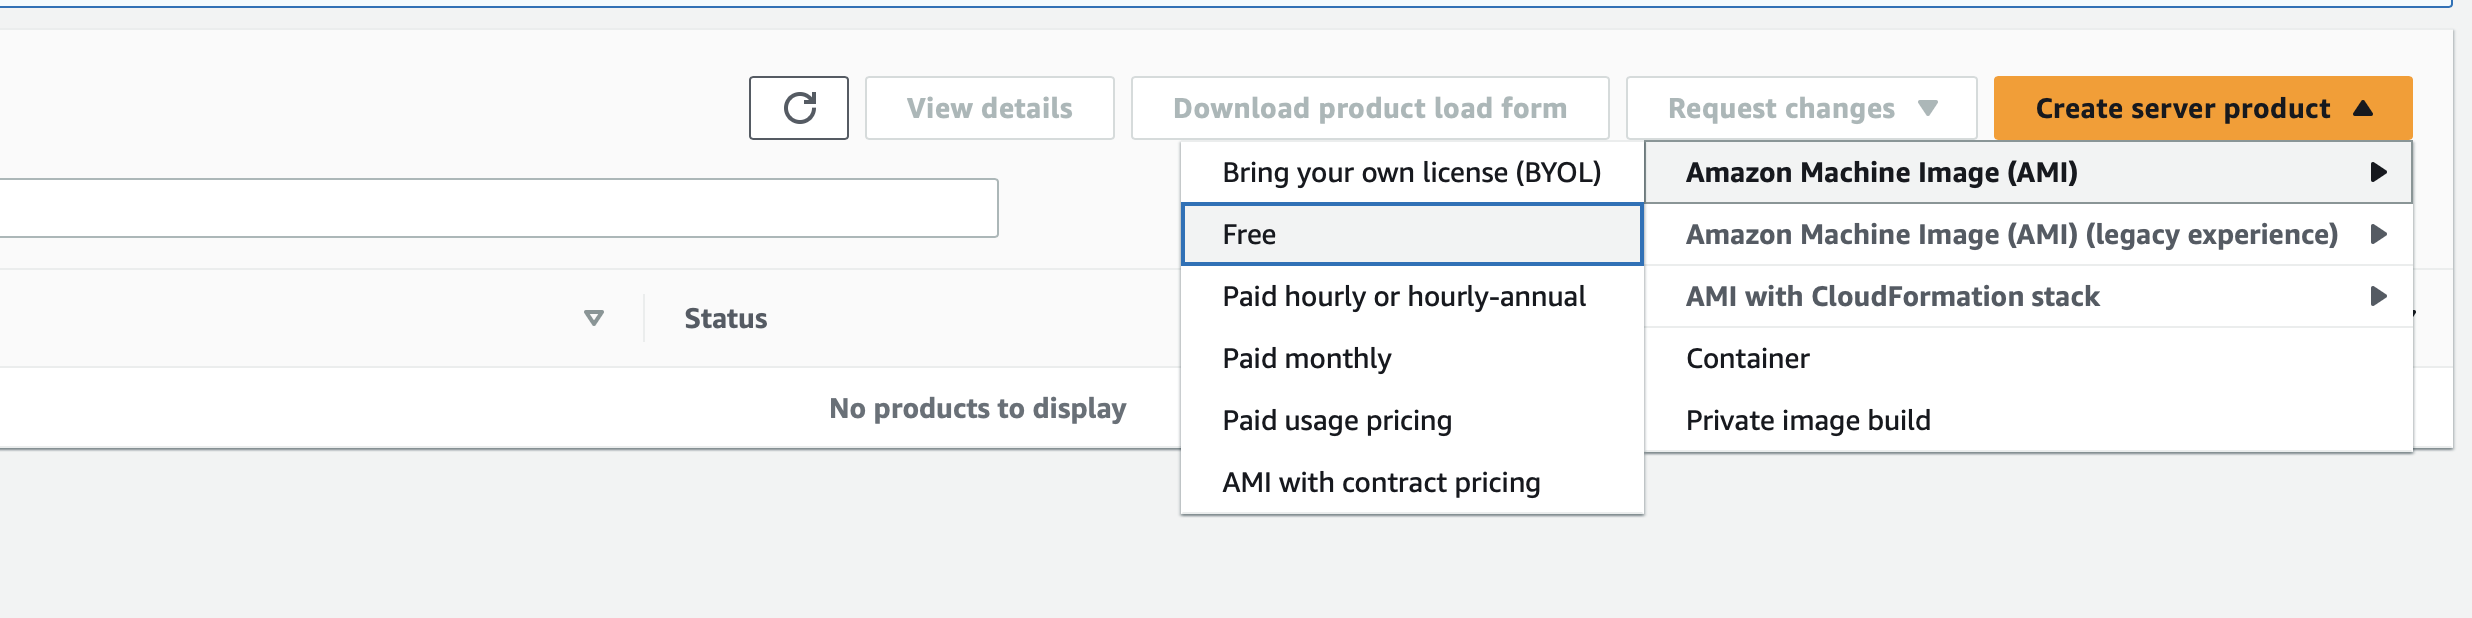 Create new AMI for Marketplace